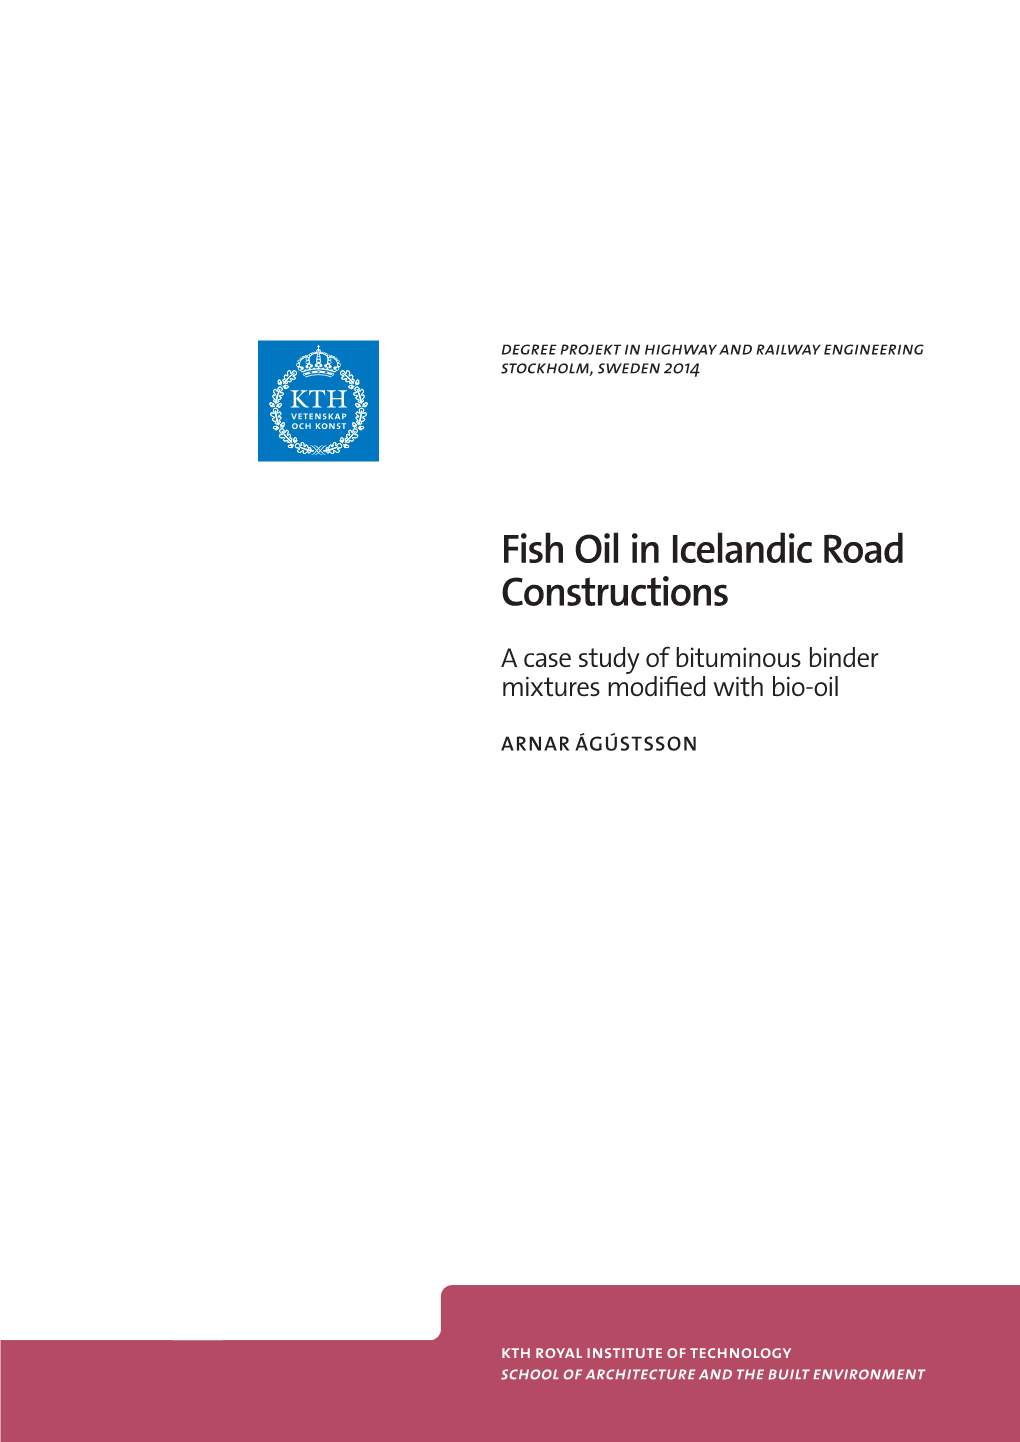 Fish Oil in Icelandic Road Constructions